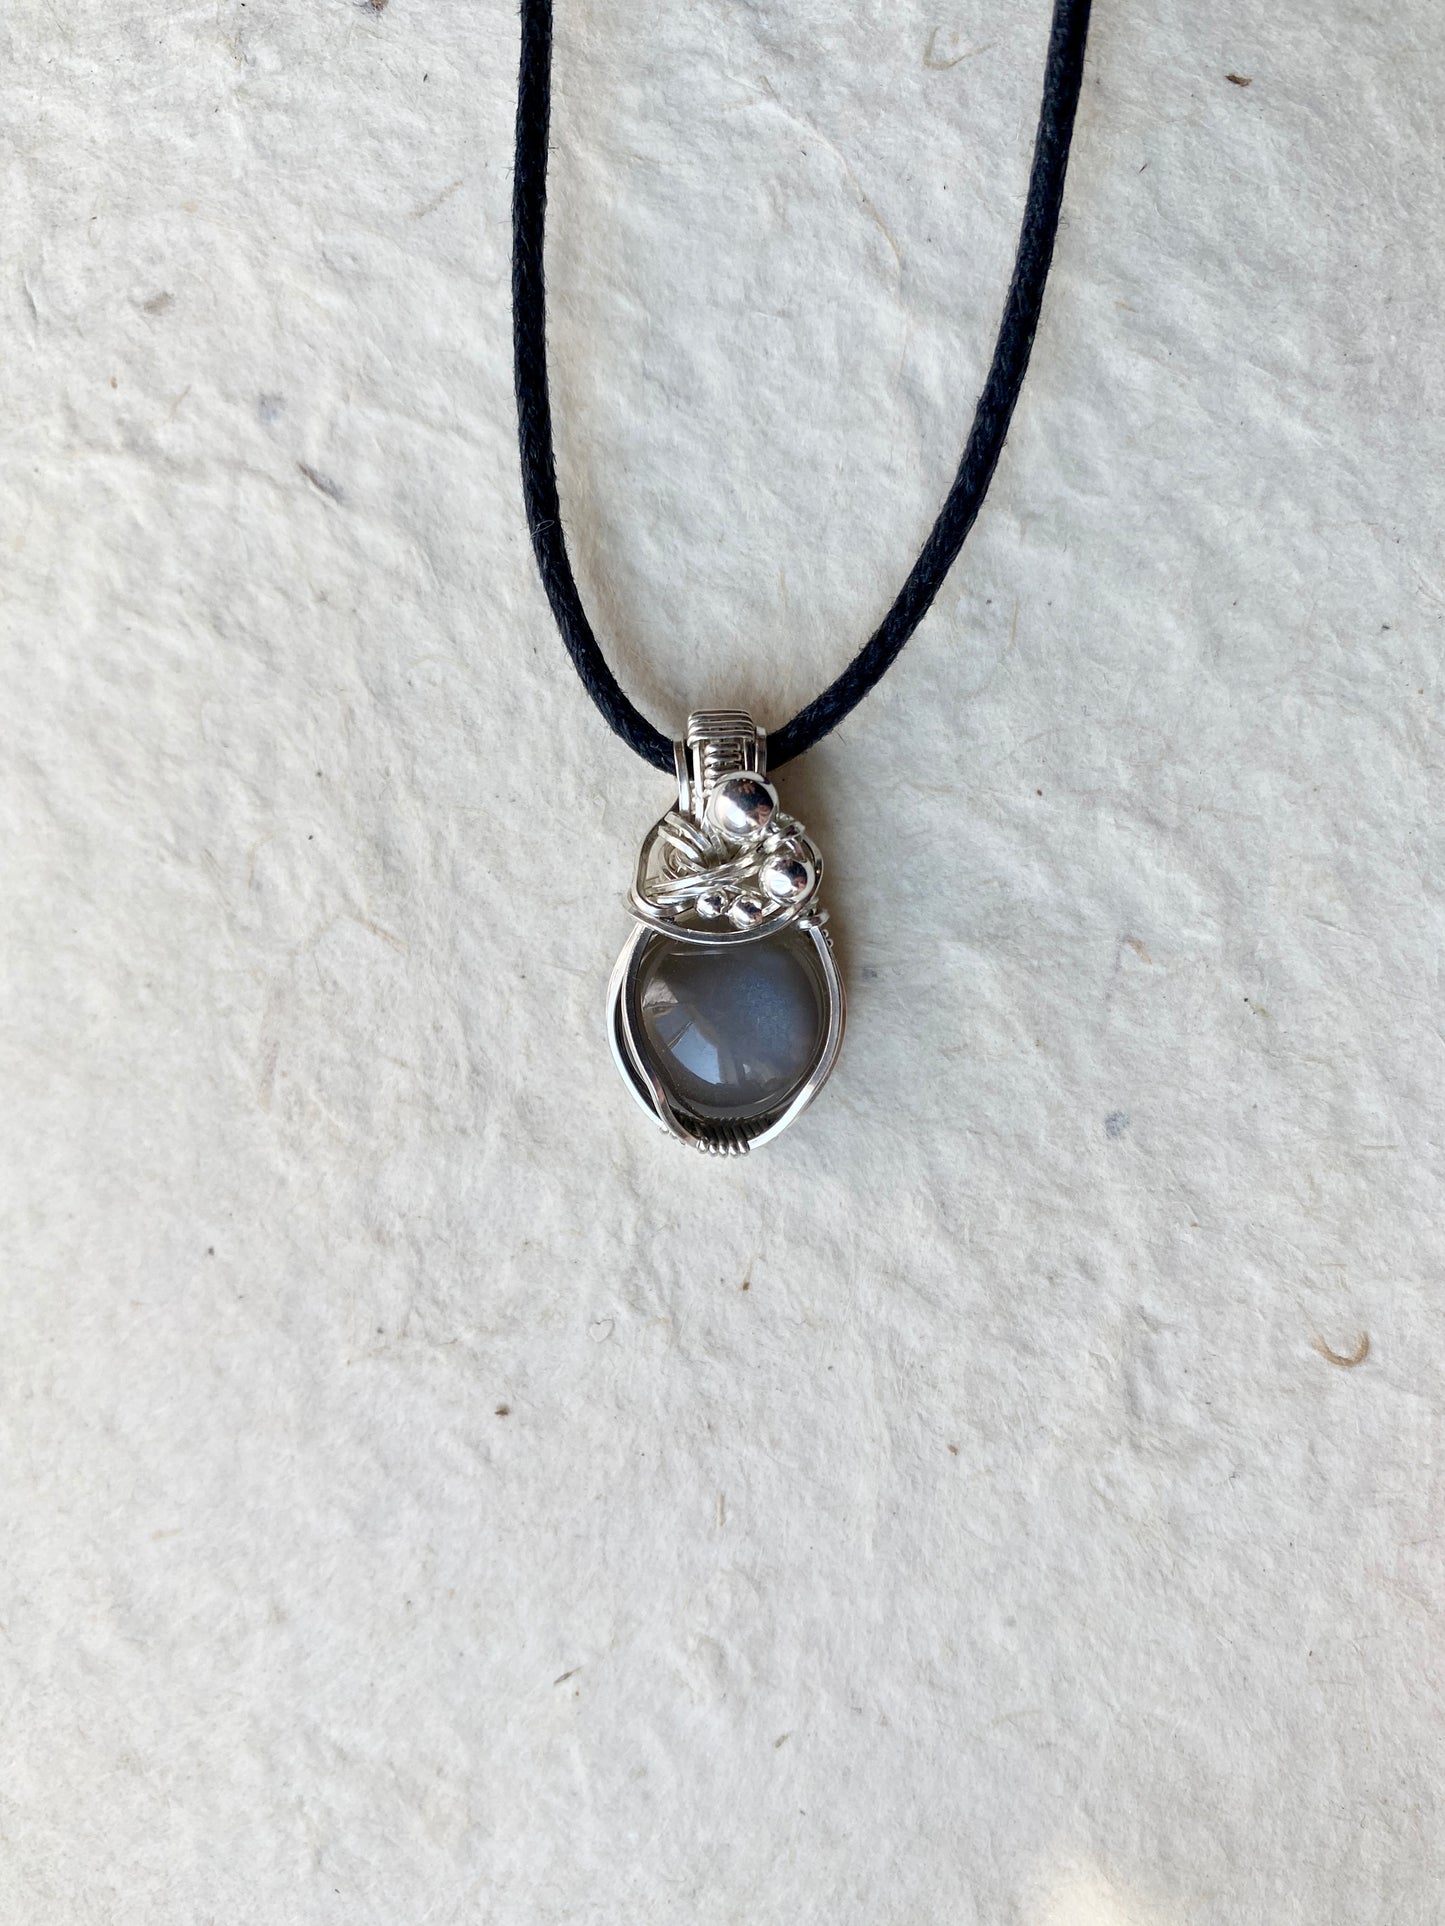 New Moon Wire Wrapped Gray Mini Moonstone Necklace - Original Design in .925 Sterling Silver Wire